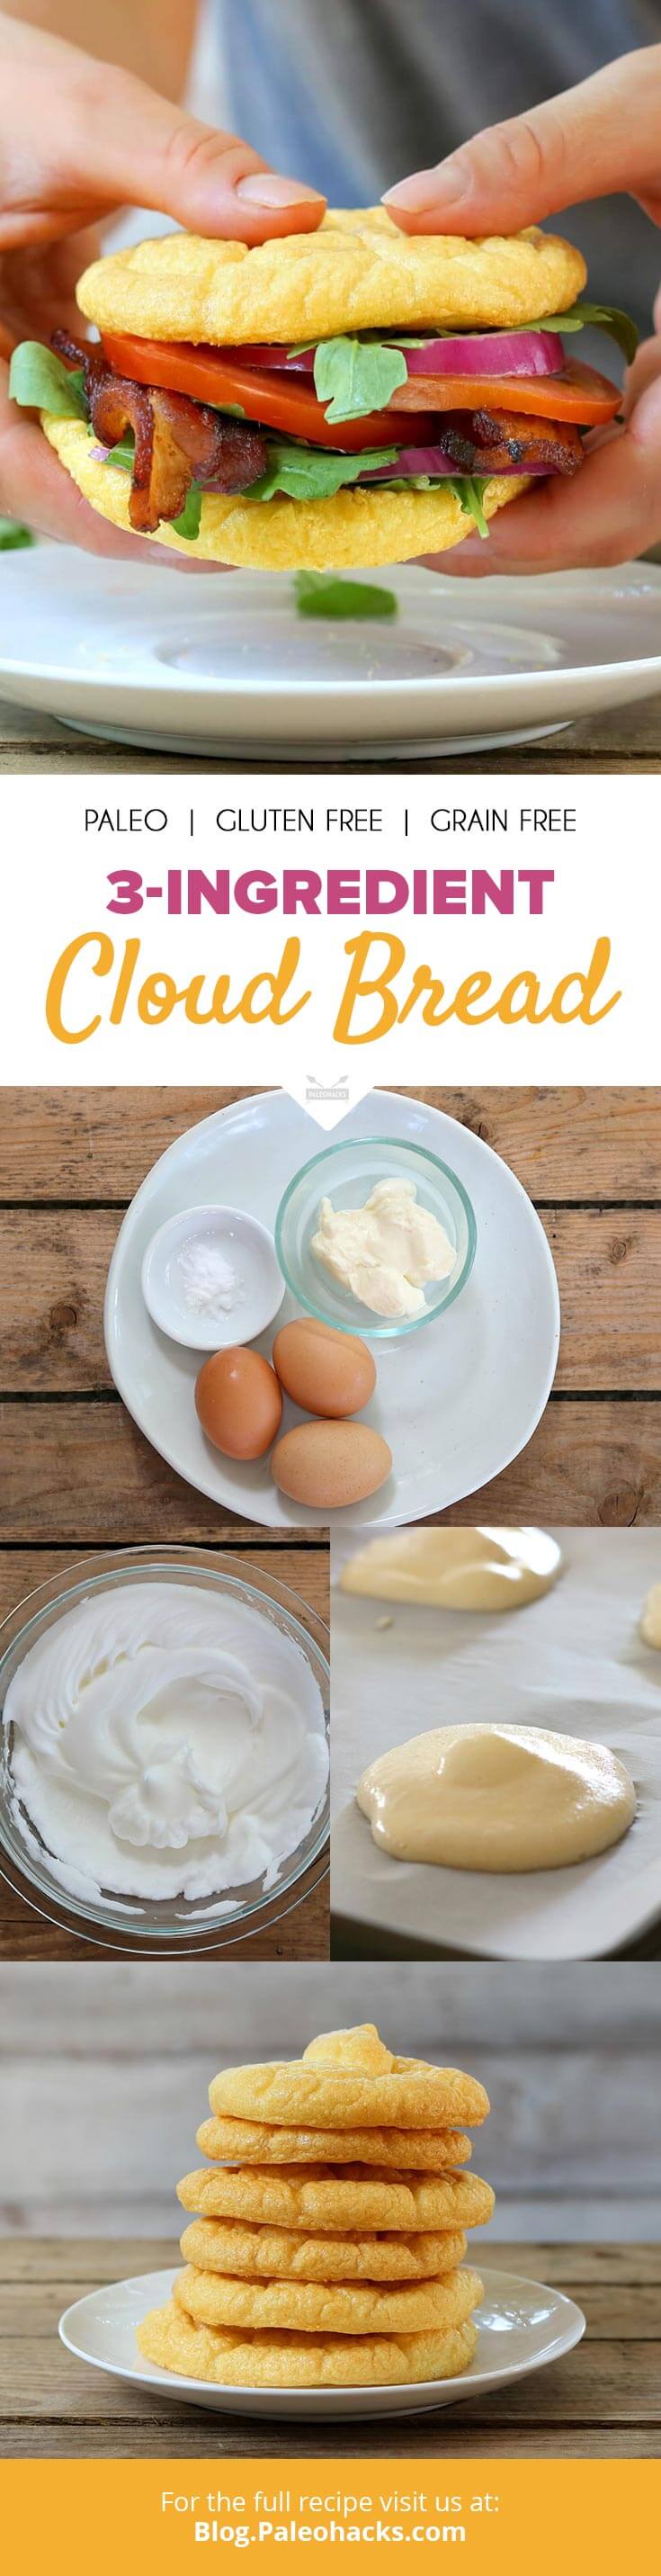 Light and airy, this 3-ingredient cloud bread is easy to make and can be topped with anything from sweet jam to savory cashew cheese.